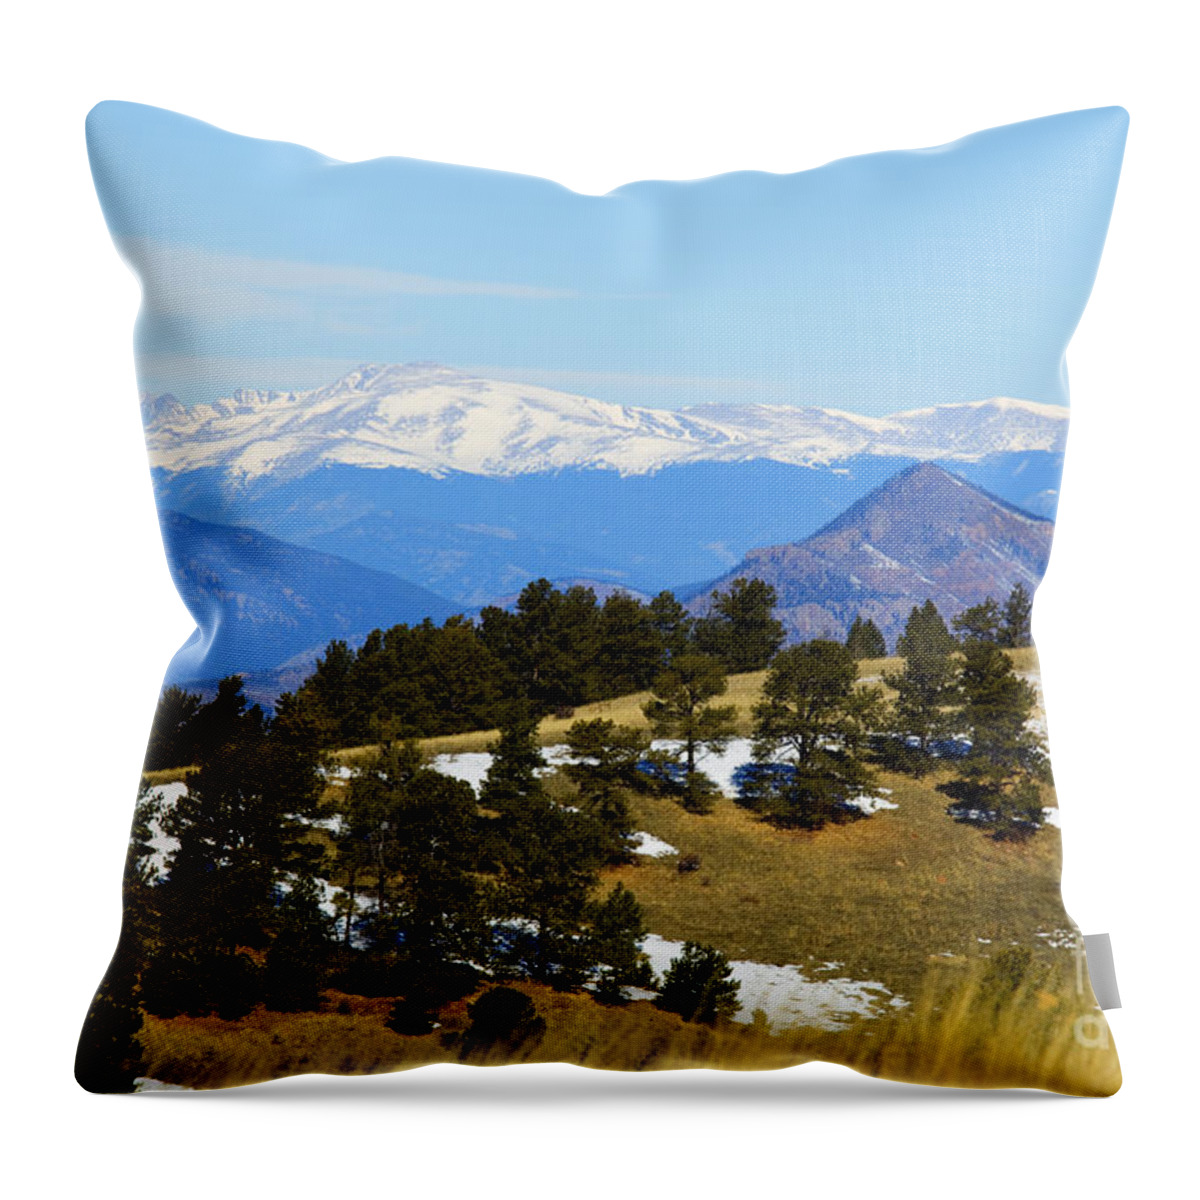 Mosquito Range Throw Pillow featuring the photograph Mosquito Range Mountains by Steven Krull